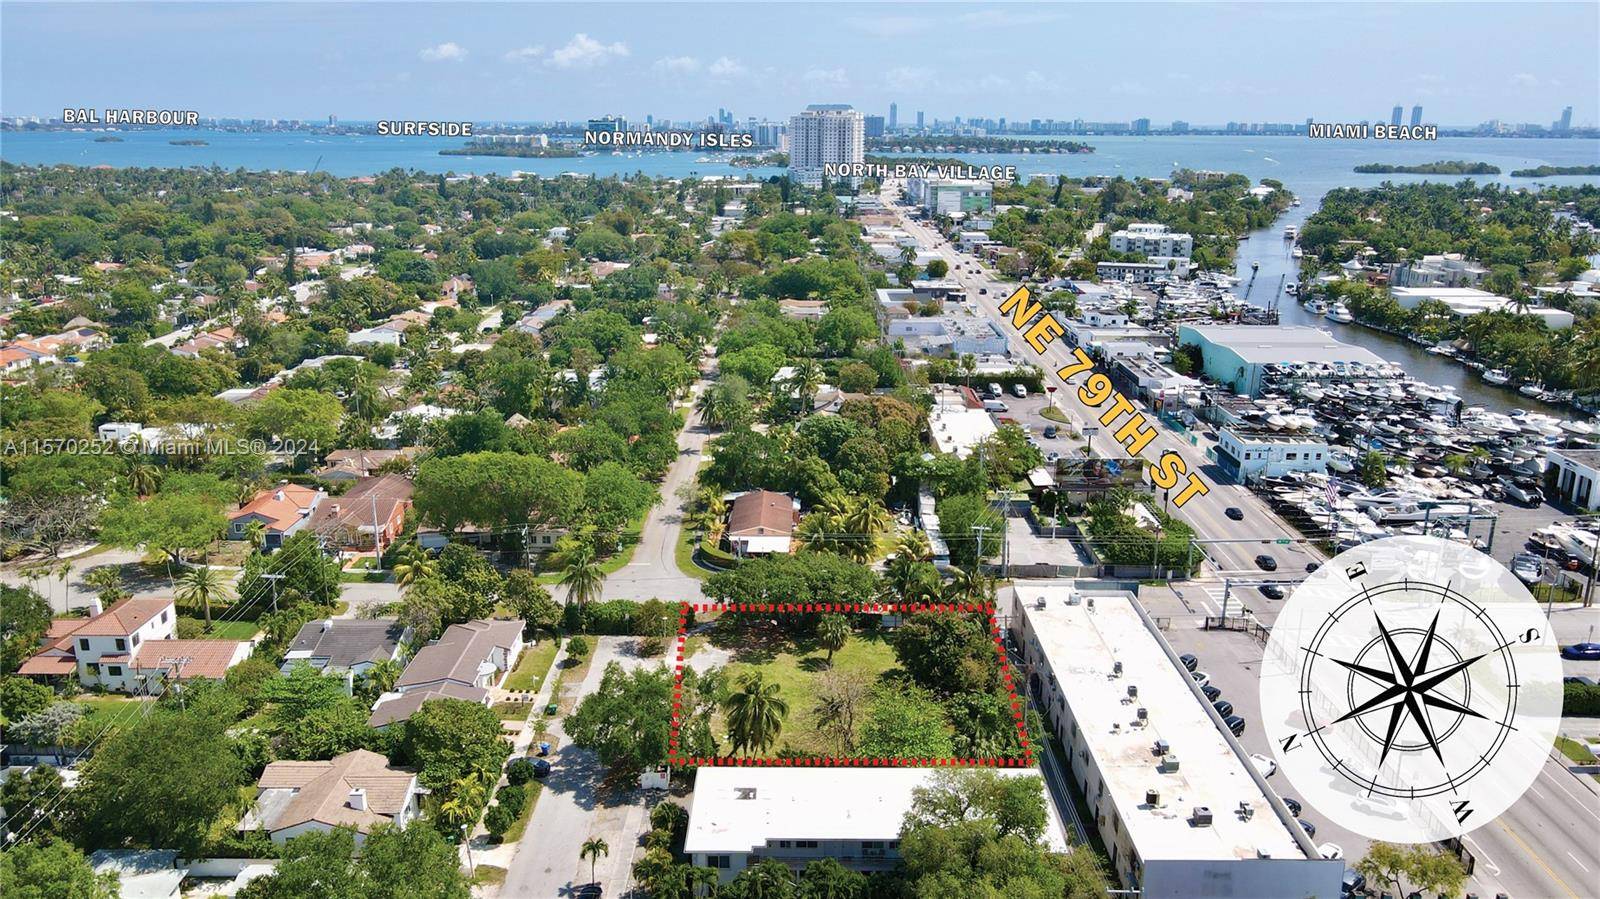 INVESTOR ALERT ! VACANT LOT FOR DEVELOPERS T5R the vibrant neighborhood of Shorecrest in Miami, this vacant land is a prime opportunity, PROPOSED PLANS AVAILABLE TO BUILD A 5 STORY ...